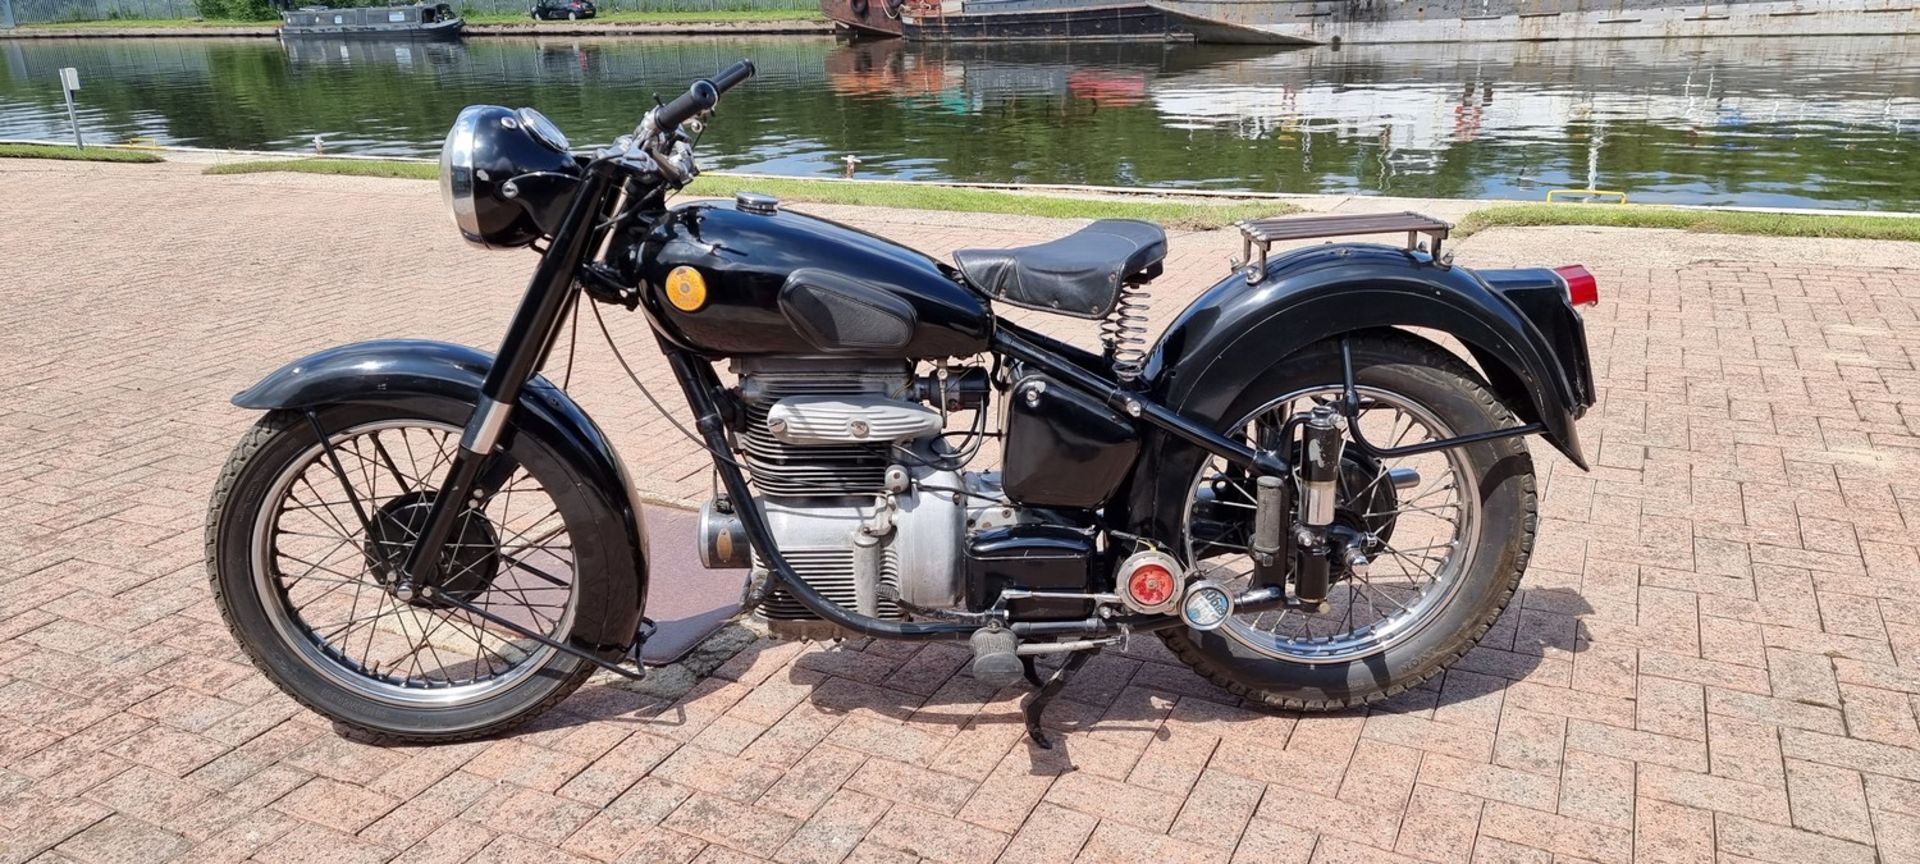 1958 Sunbeam S8, 500cc. Registration number 352 XVL (non transferrable). Frame number S8 8632. - Image 2 of 13